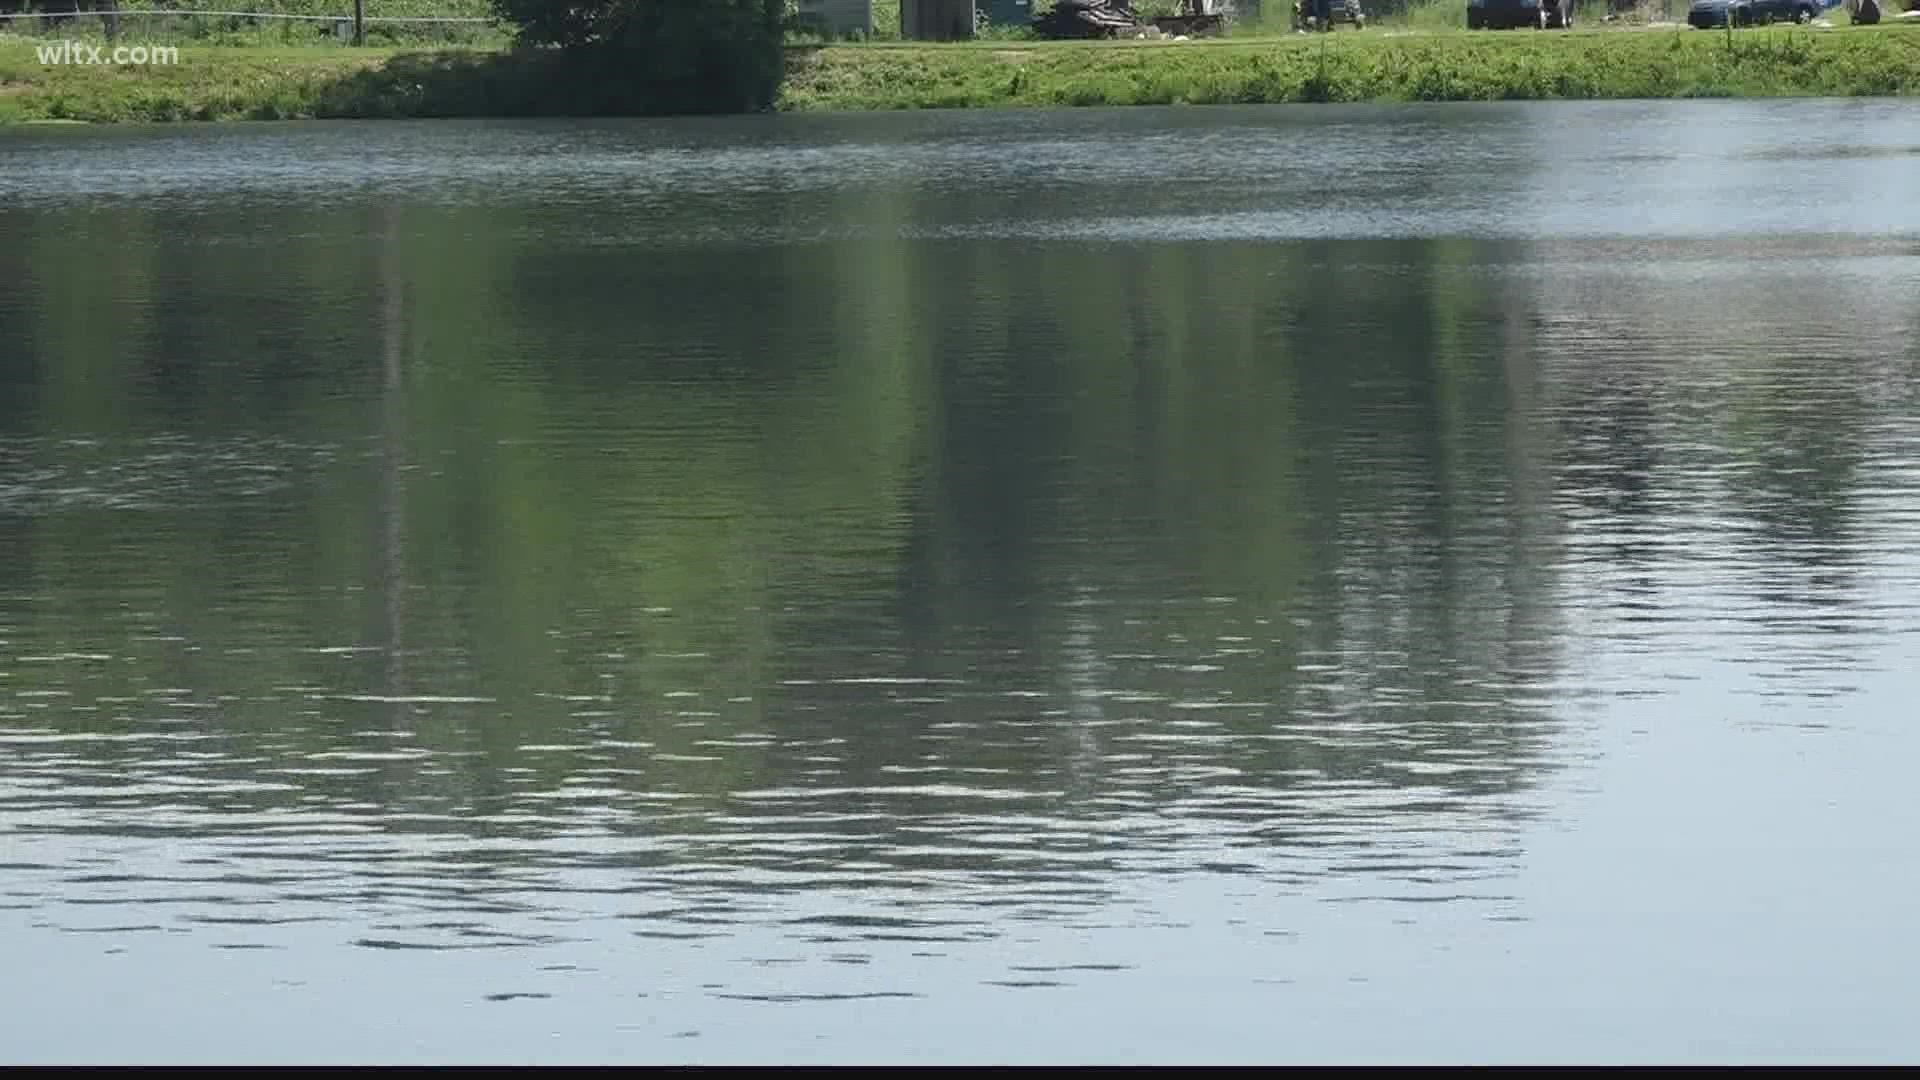 News 19 got a tour of the effort to stop the root cause of the smelly water in the Columbia area.